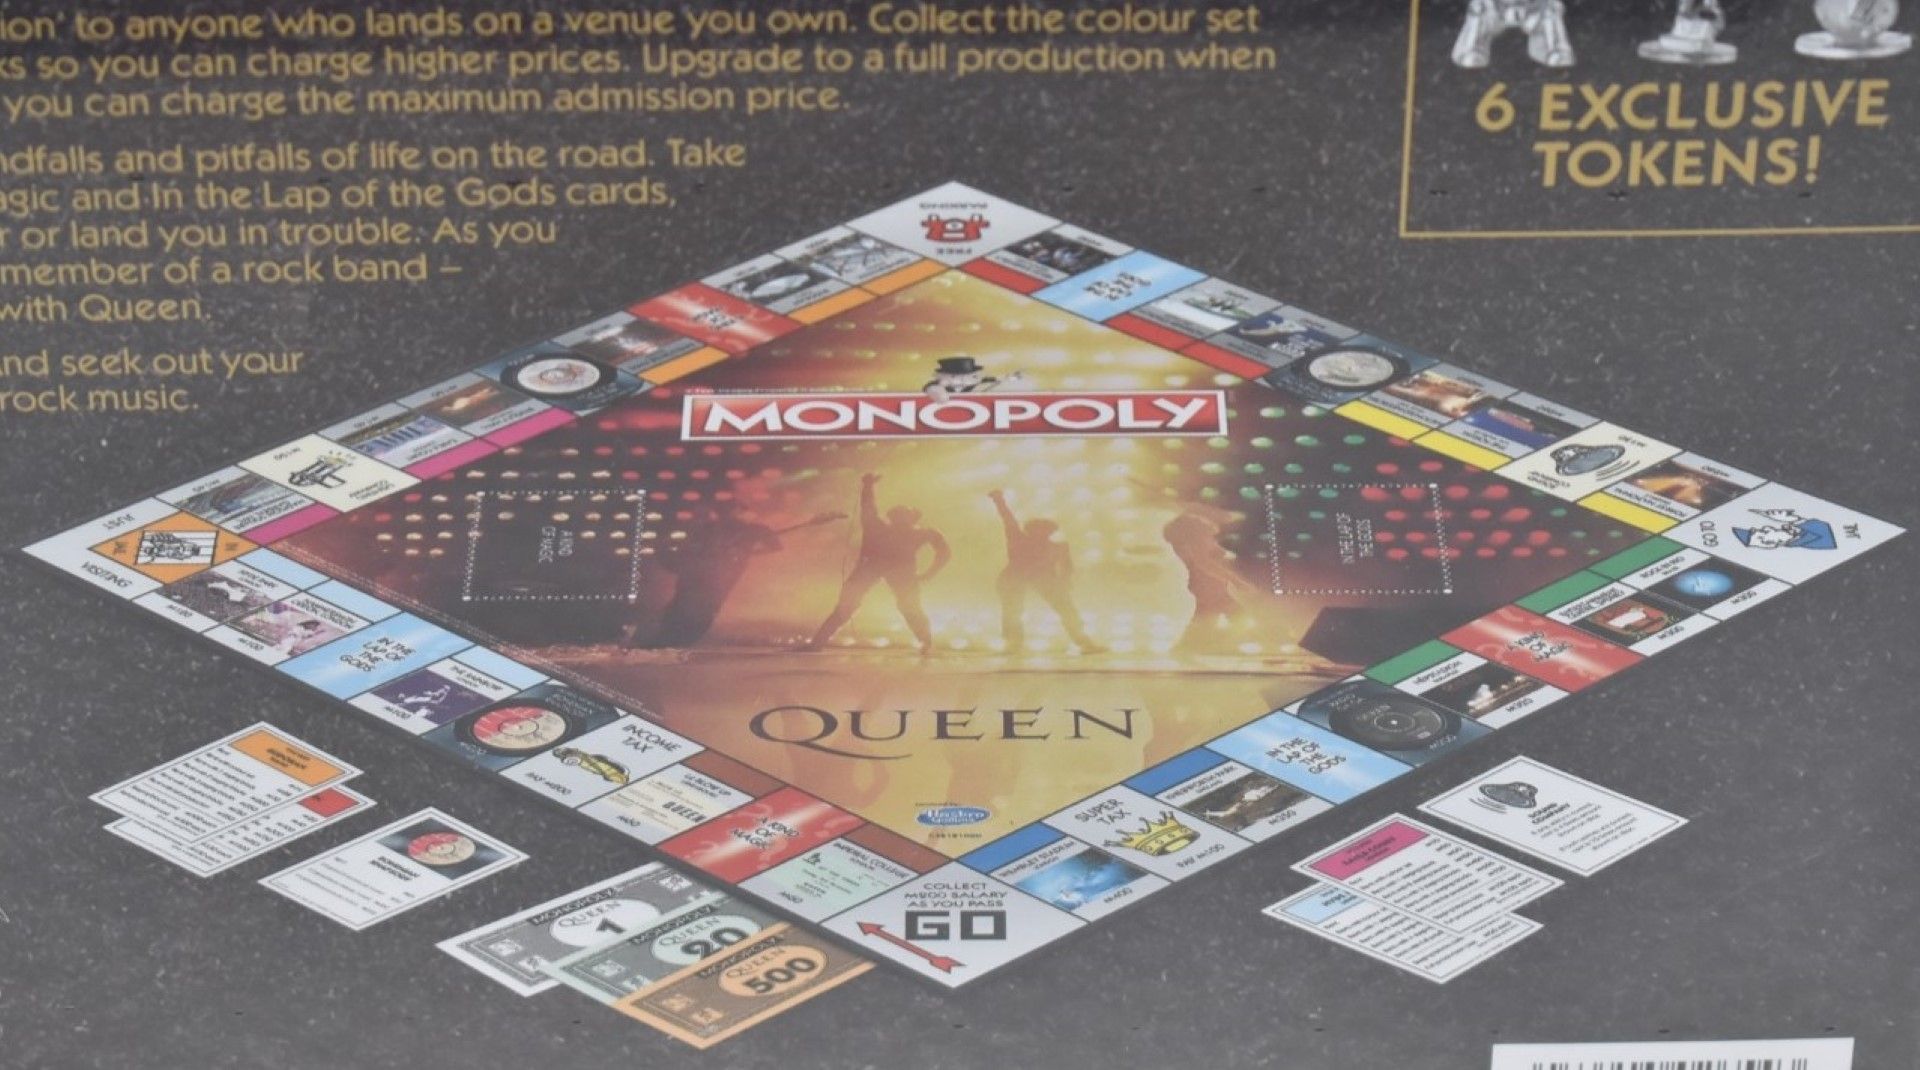 1 x Monopoly Board Game - QUEEN COLLECTORS EDITION - Officially Licensed Merchandise - New & Sealed - Image 4 of 10